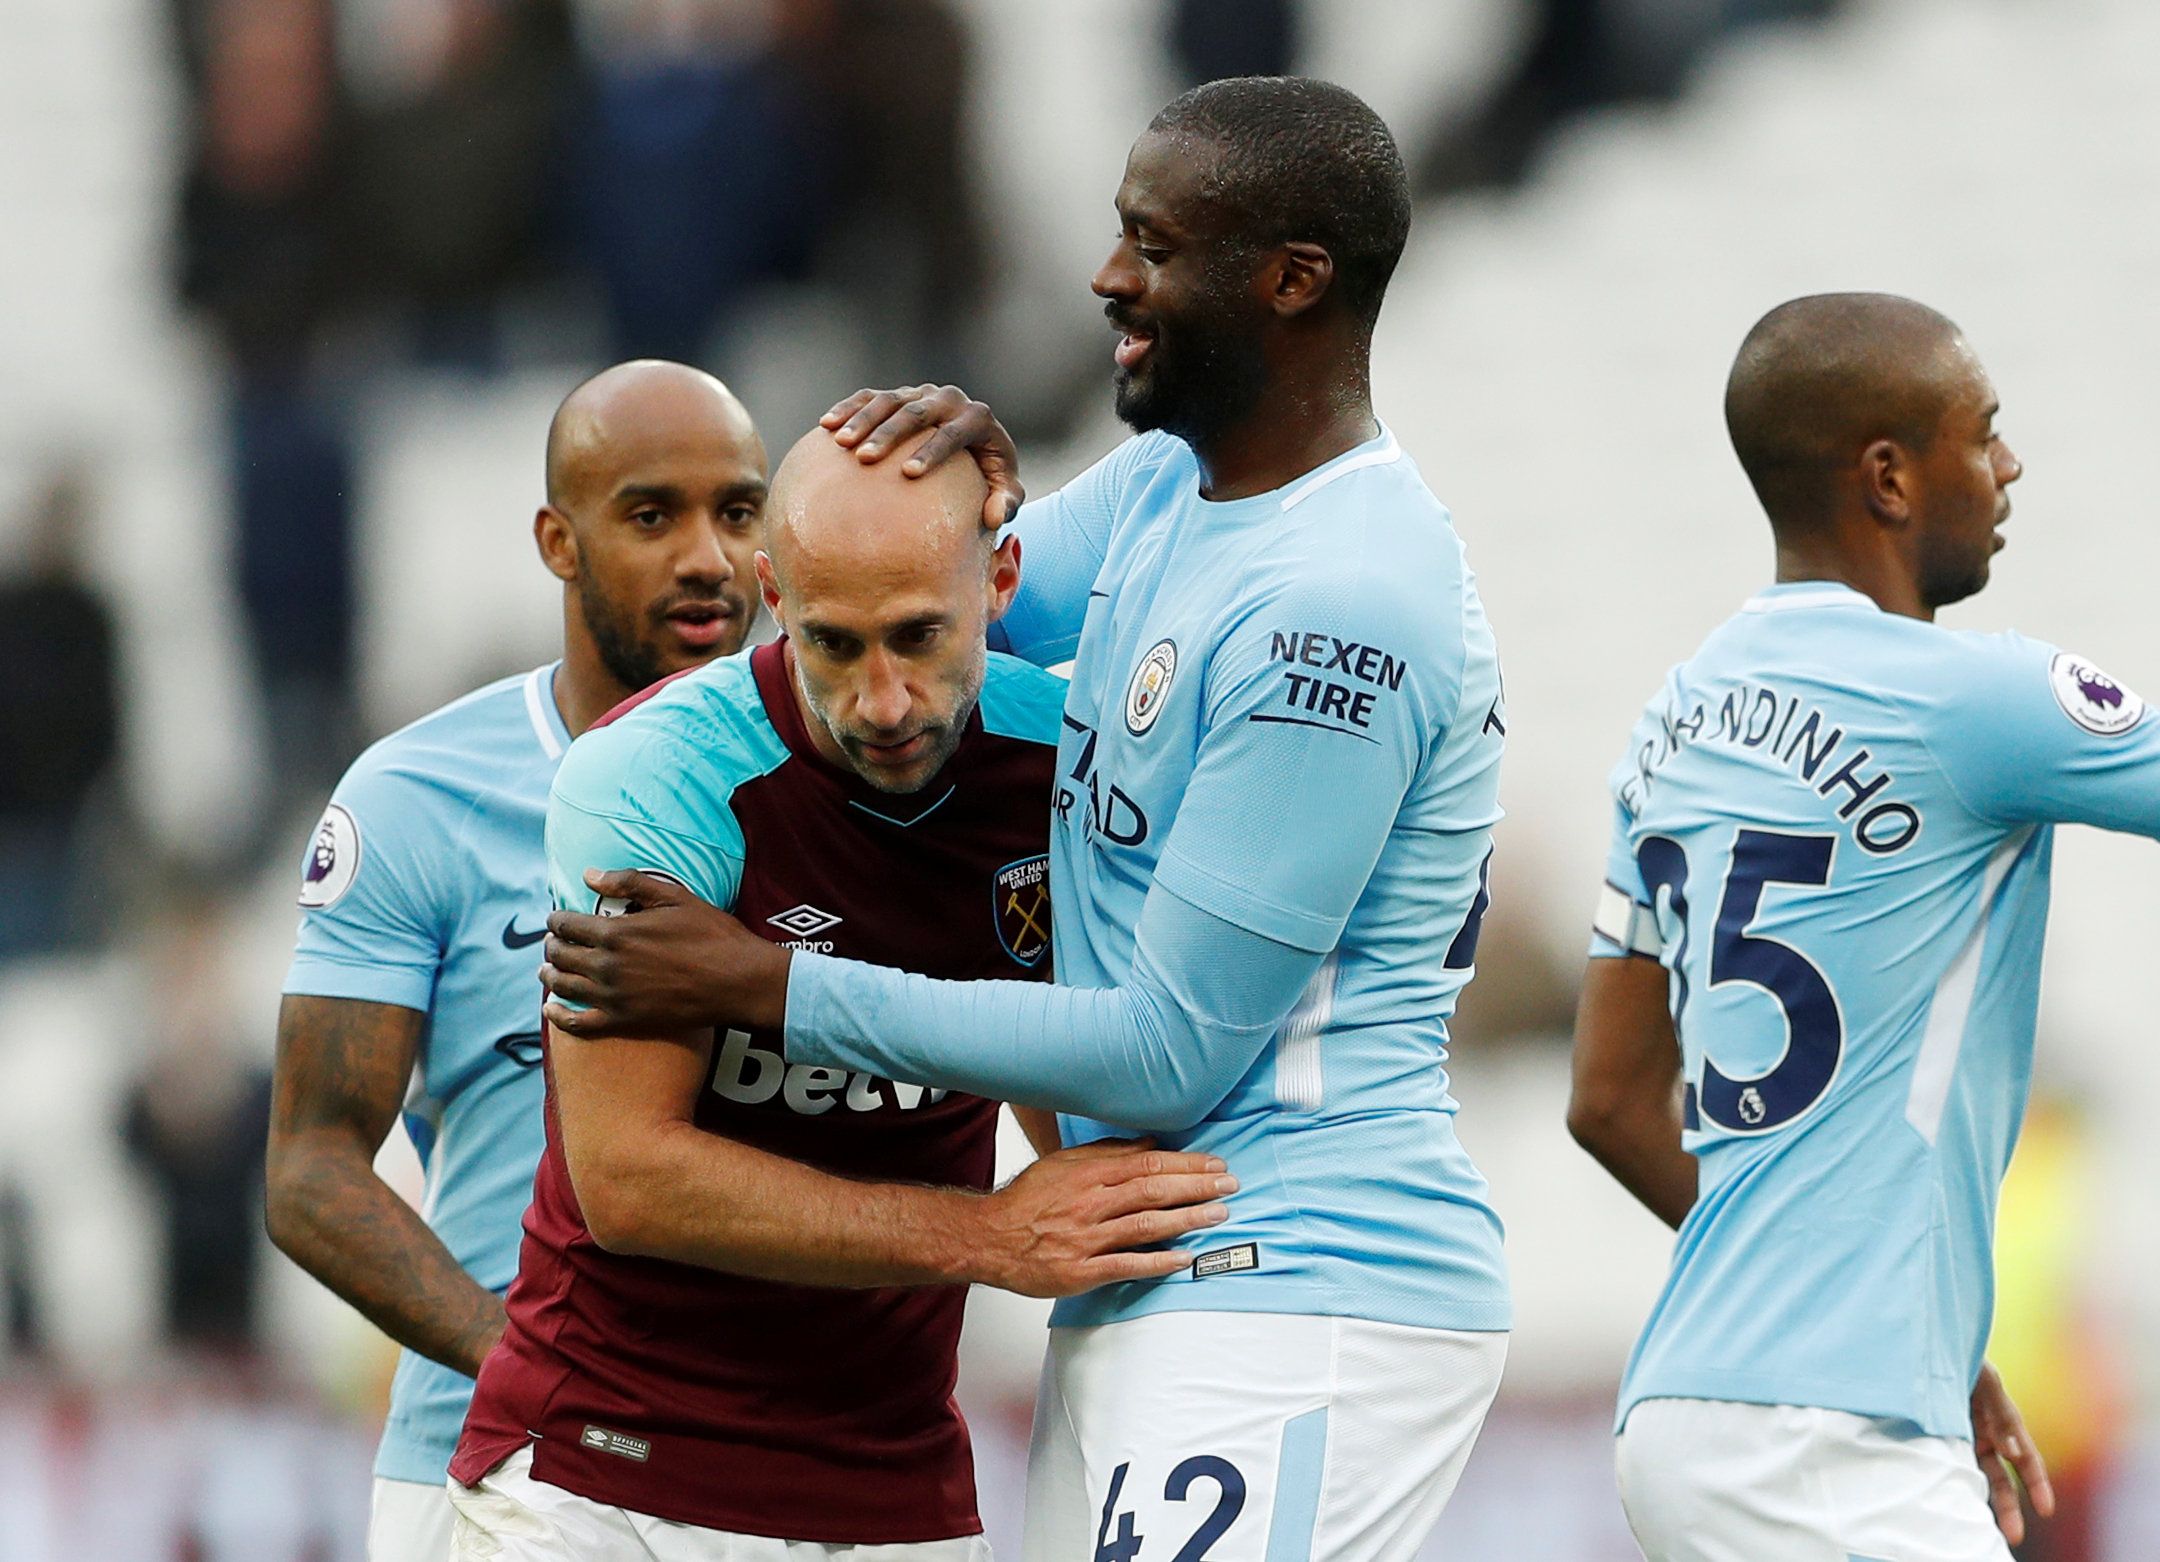 Soccer Football - Premier League - West Ham United v Manchester City - London Stadium, London, Britain - April 29, 2018   West Ham United's Pablo Zabaleta with Manchester City's Yaya Toure after the match   Action Images via Reuters/John Sibley    EDITORIAL USE ONLY. No use with unauthorized audio, video, data, fixture lists, club/league logos or "live" services. Online in-match use limited to 75 images, no video emulation. No use in betting, games or single club/league/player publications.  Ple